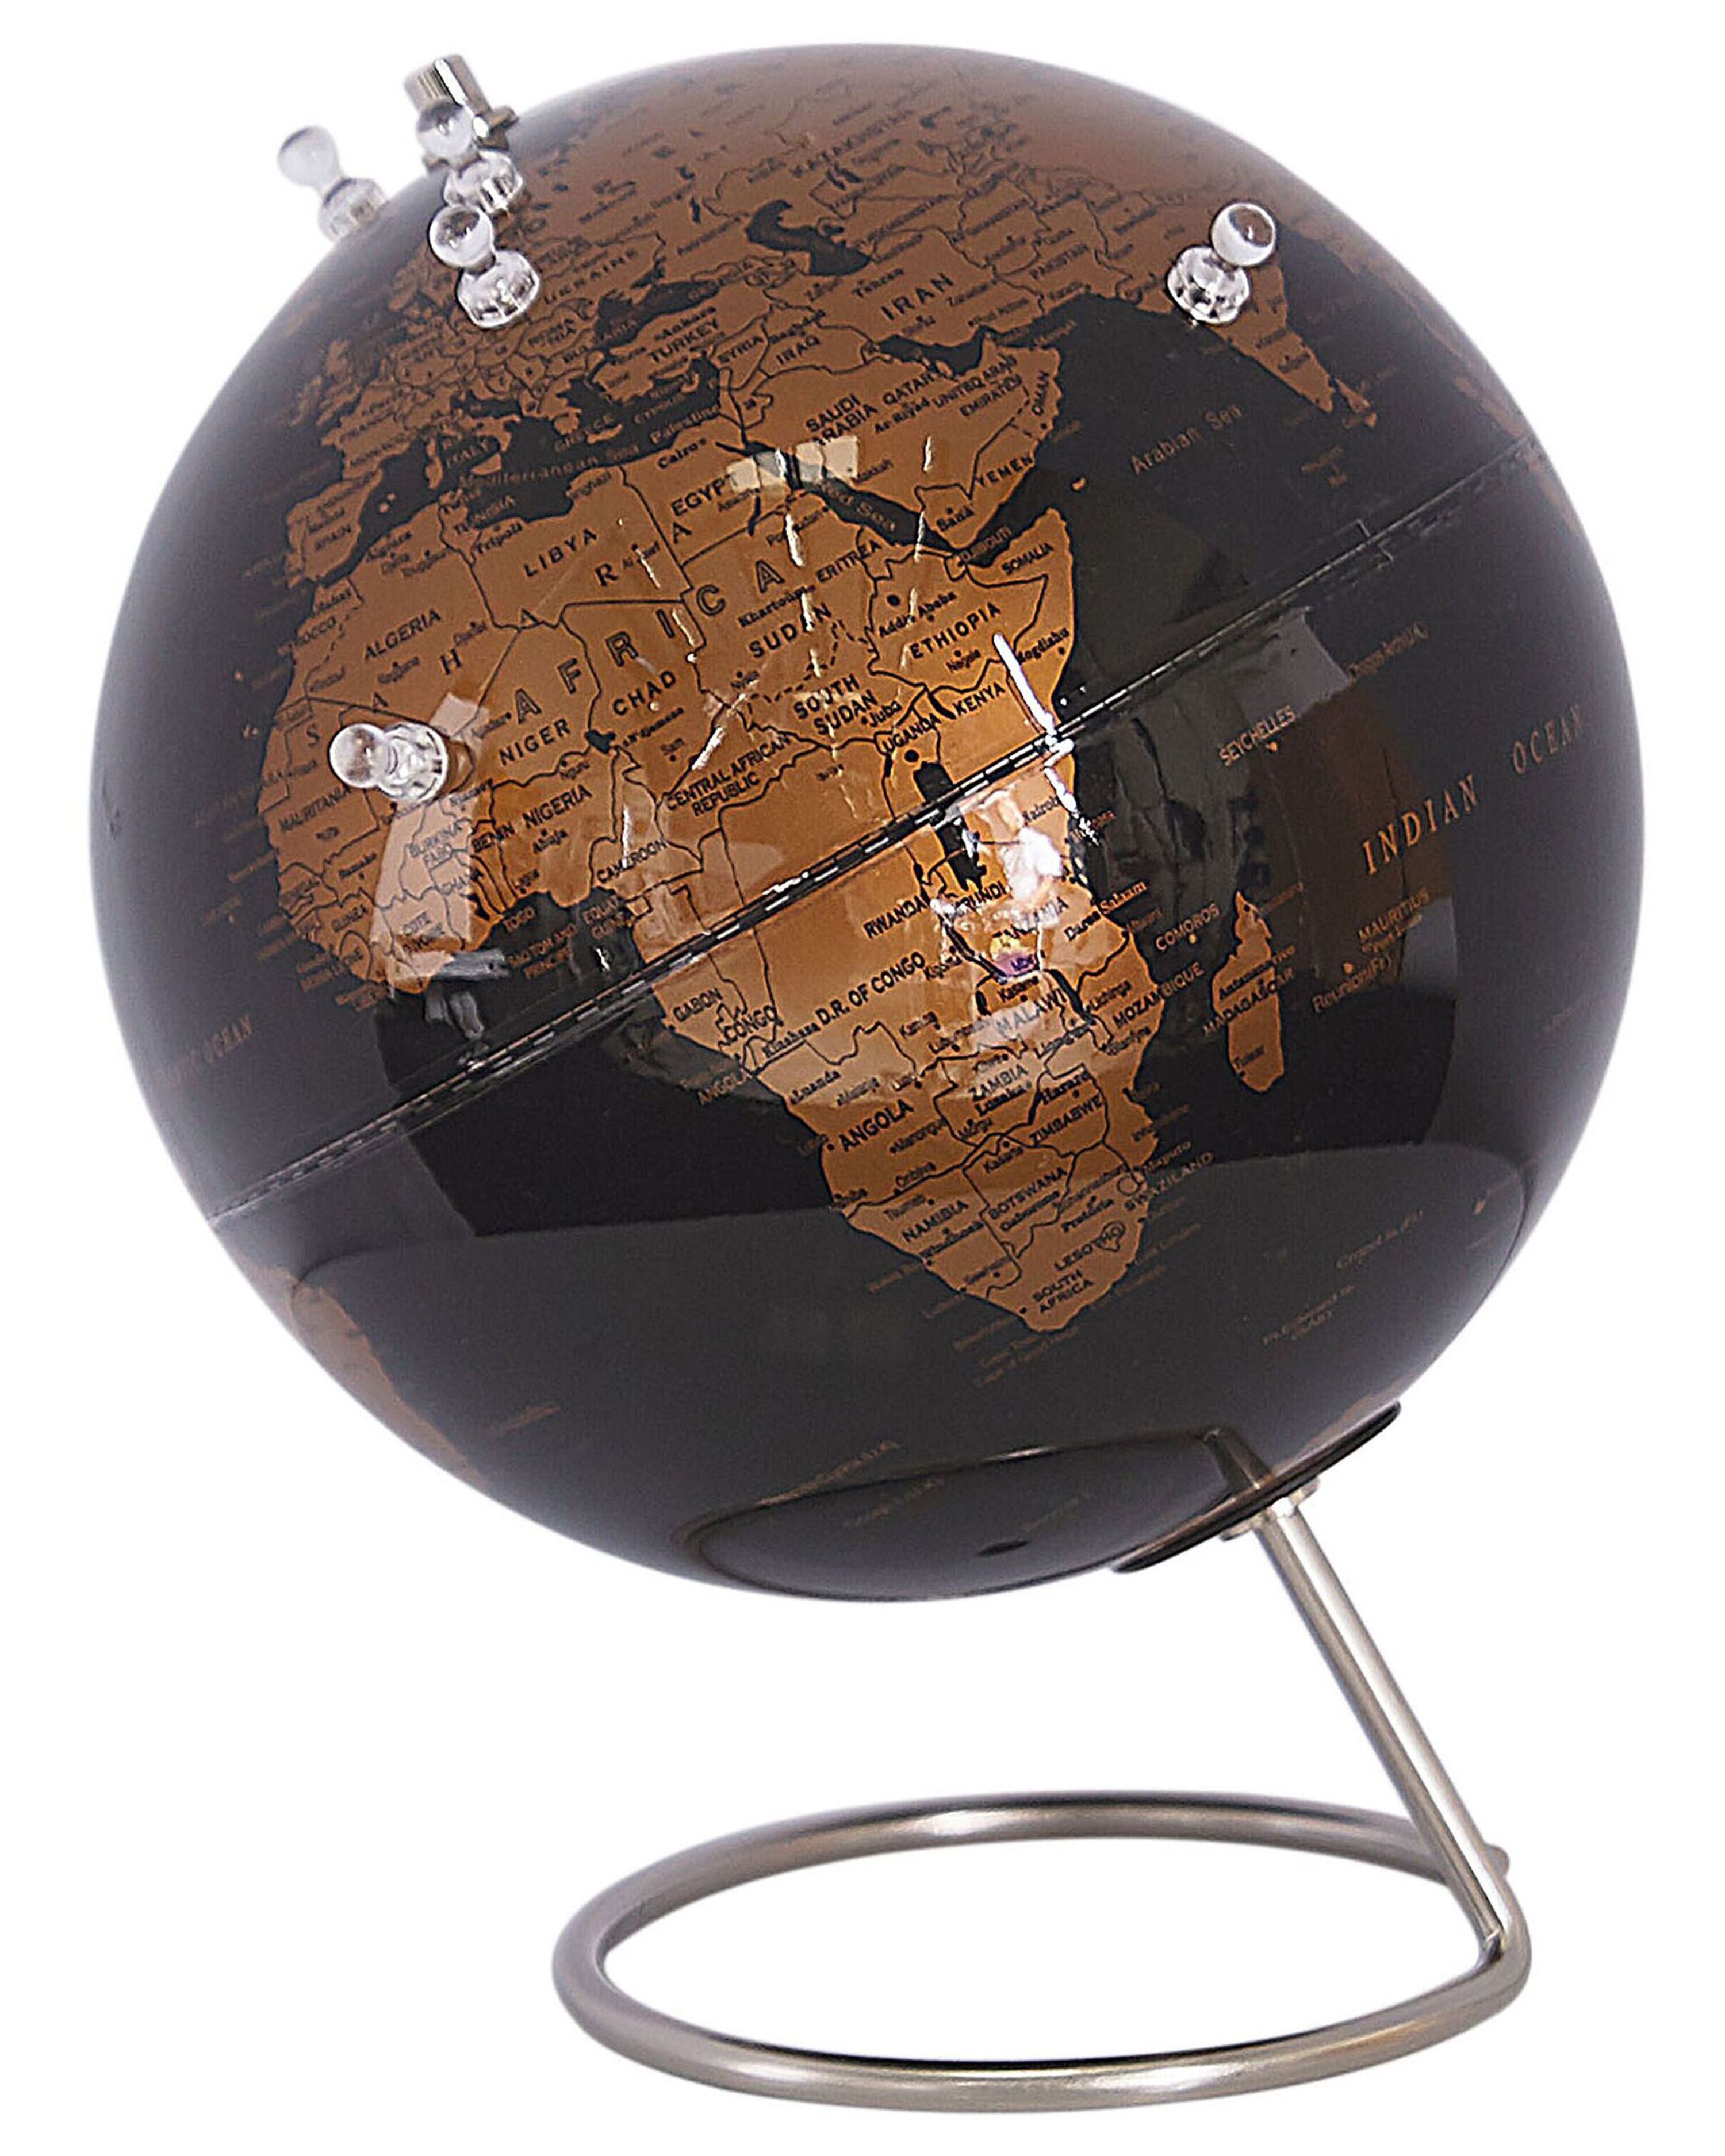 Copper　Black　Decorative　and　Globe　cm　with　Magnets　29　CARTIER